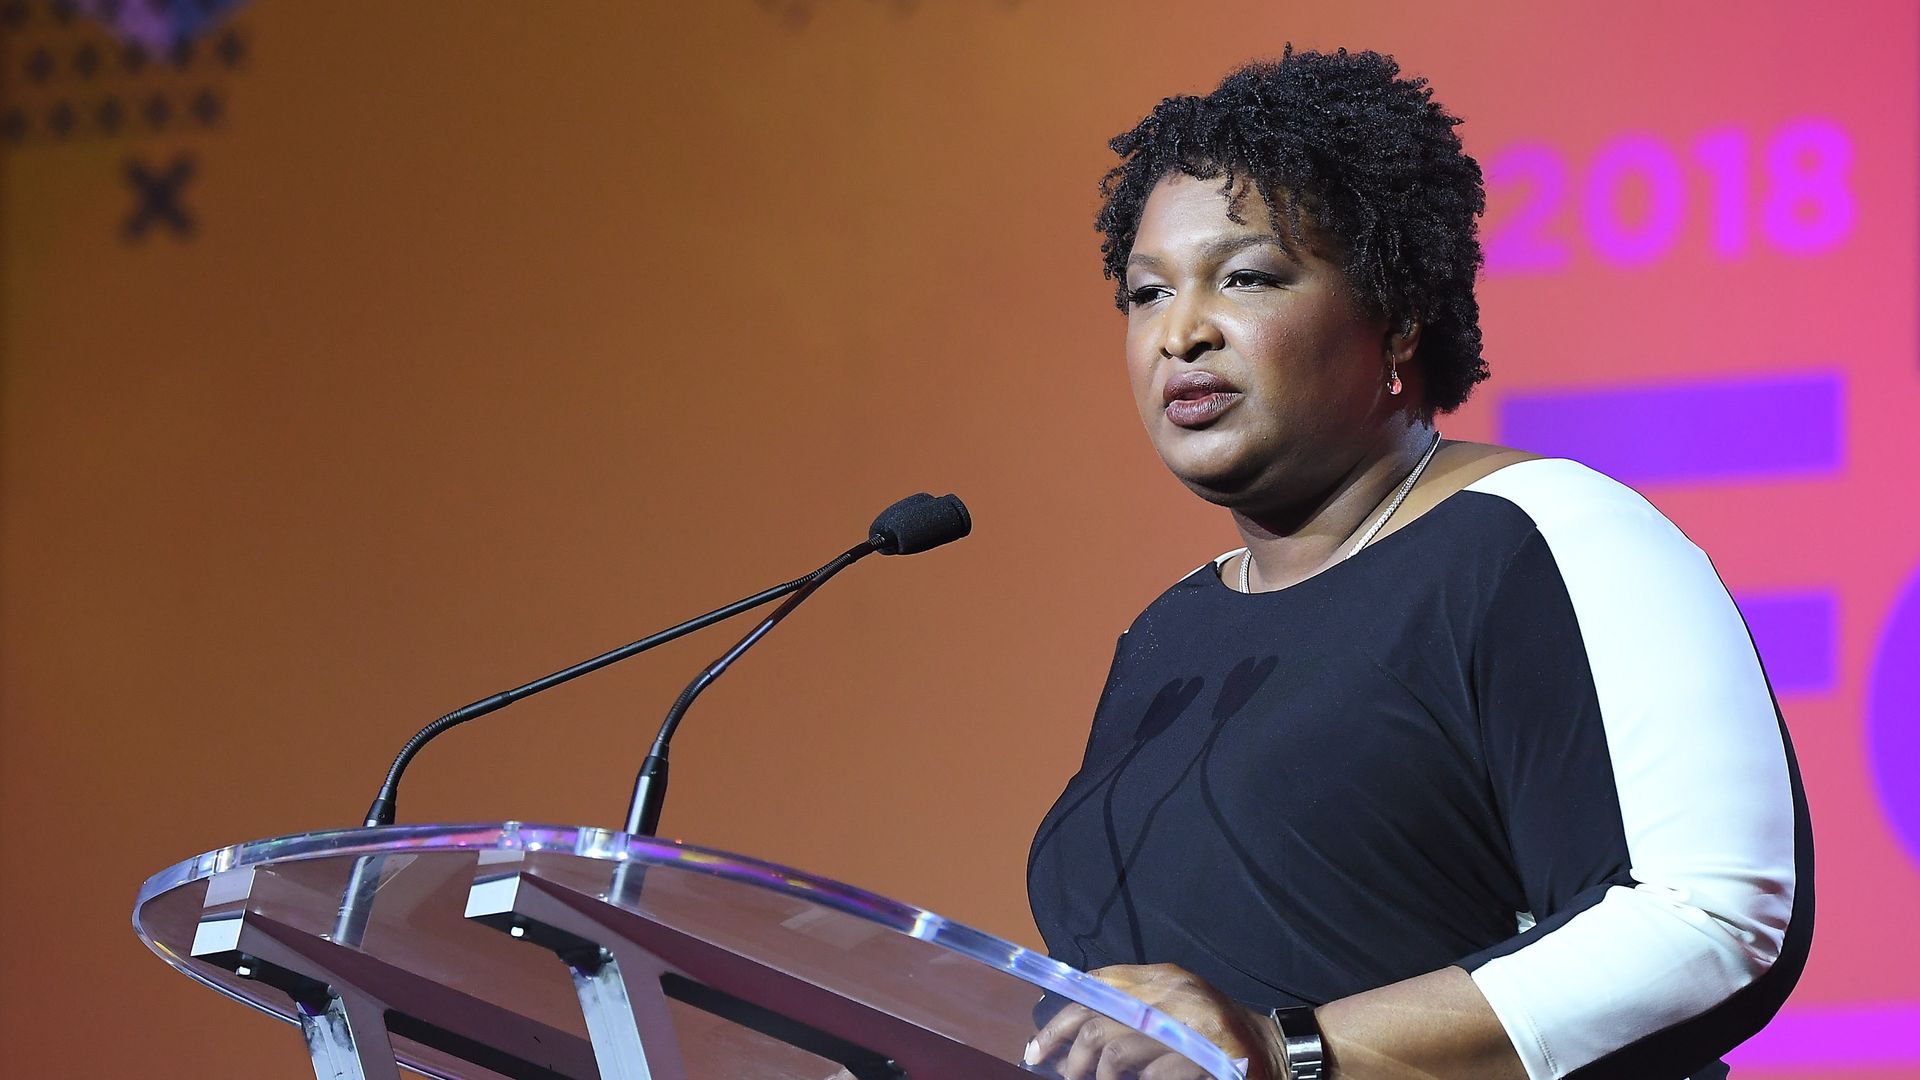 Stacey Abrams speaking at a podium.